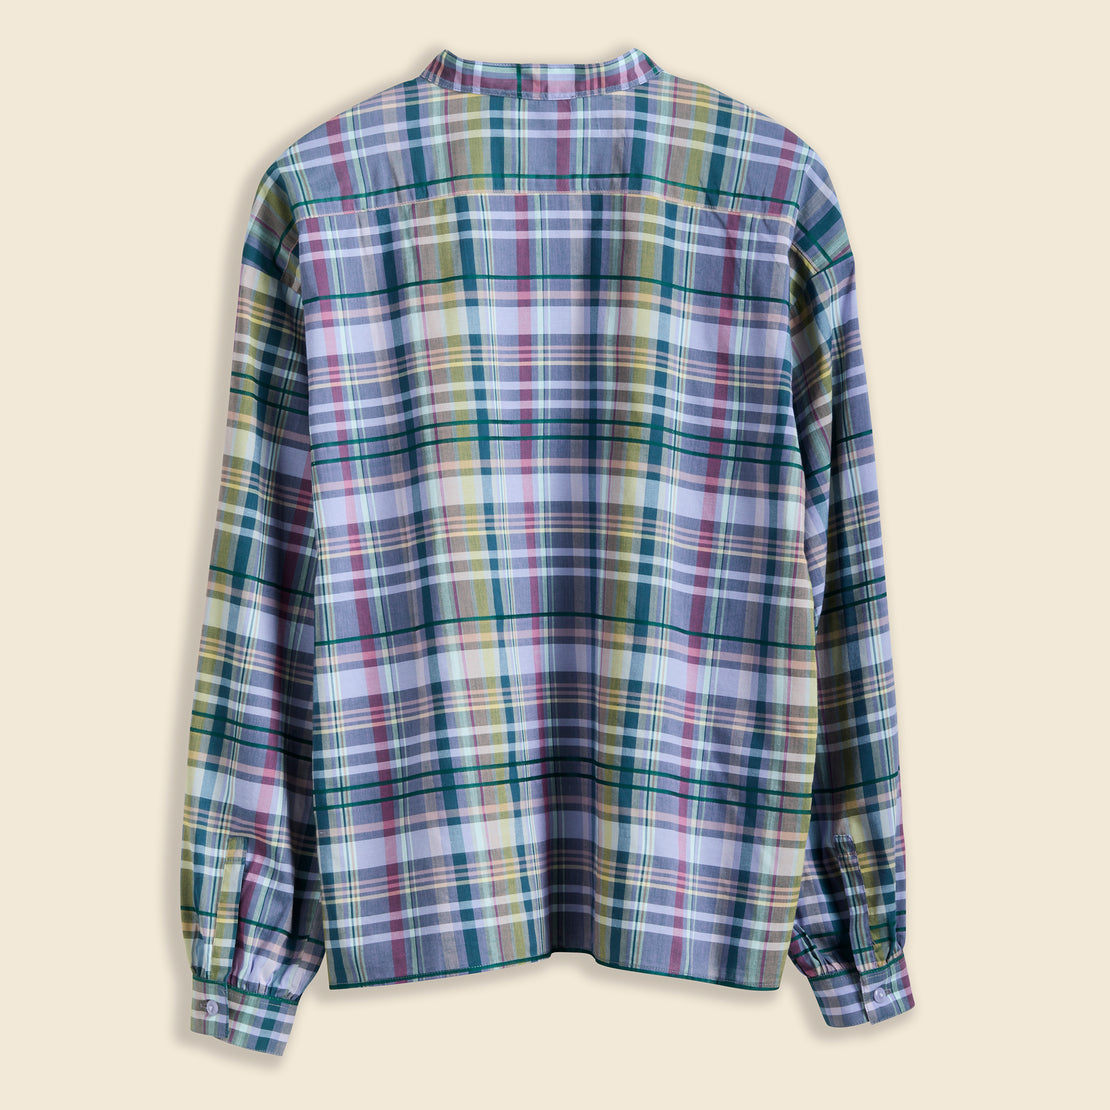 Cassandra Shirt With Pockets - Blue - Le Mont Saint Michel - STAG Provisions - W - Tops - L/S Woven